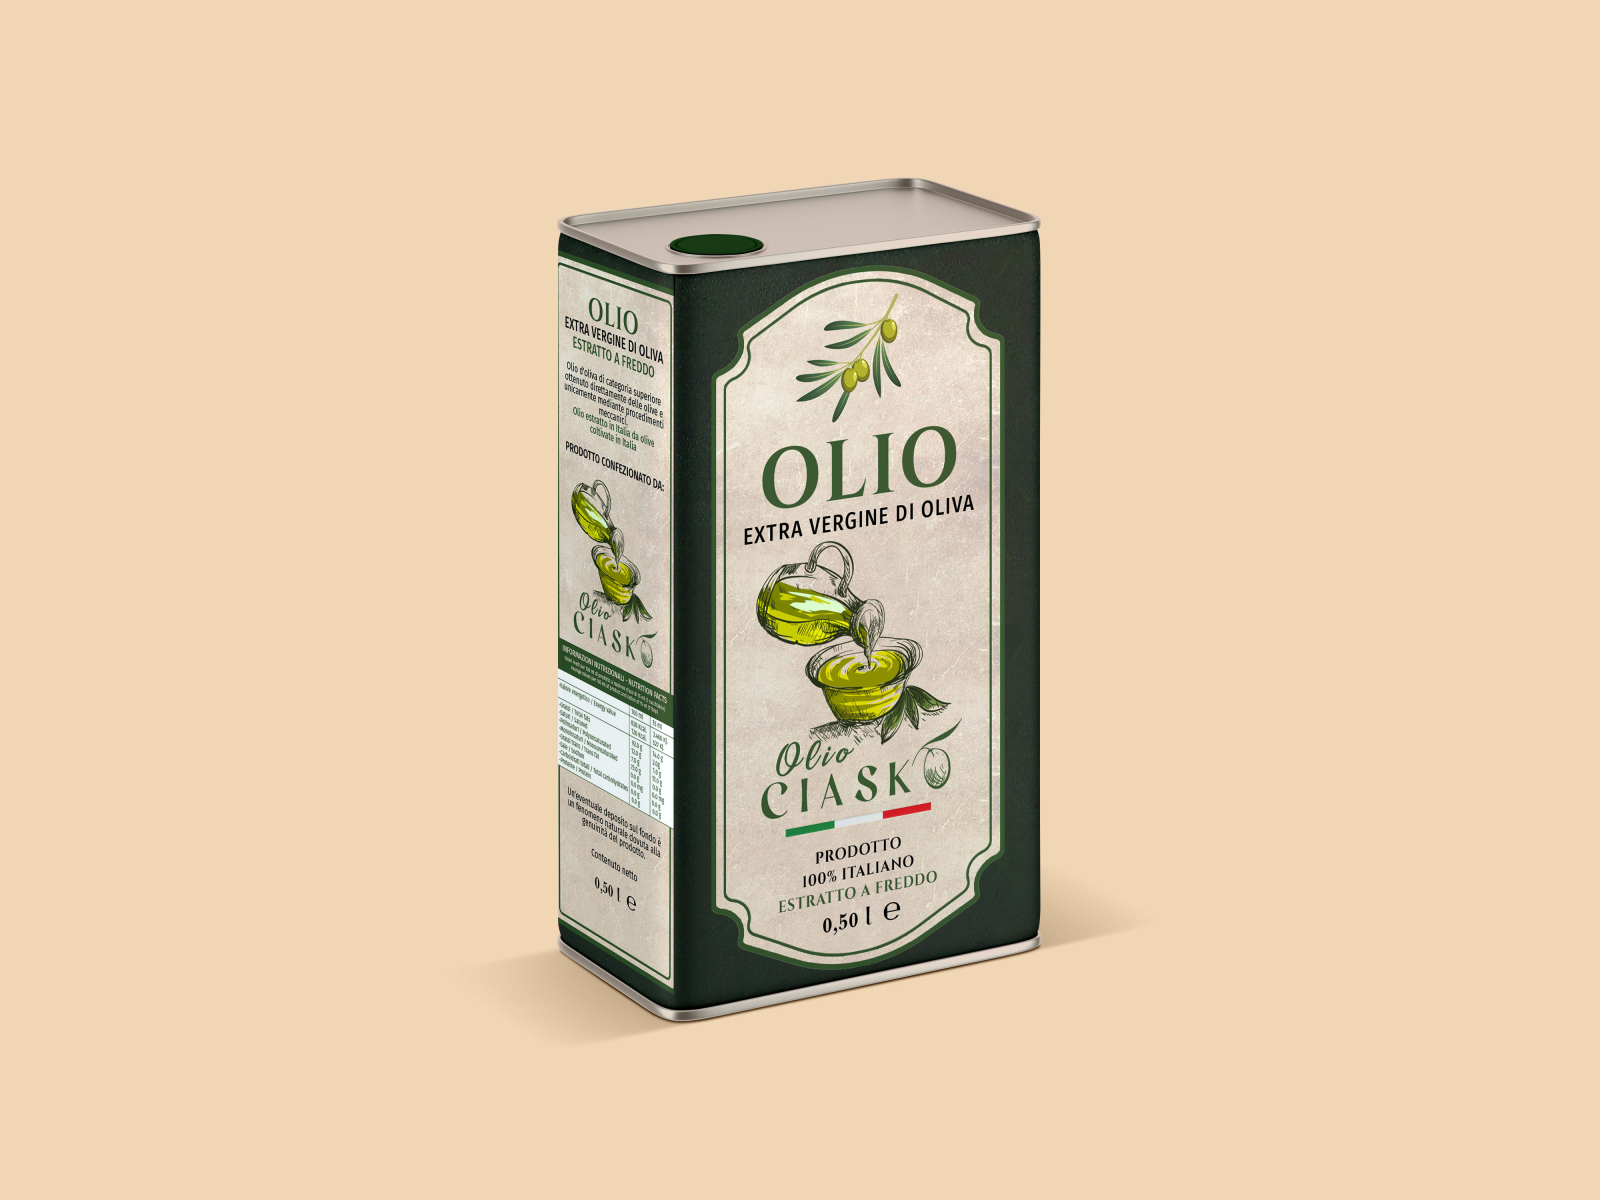 Olive Oil Tin Can Mockup PSD Free Download by Mst. Bipasha Haque on ...